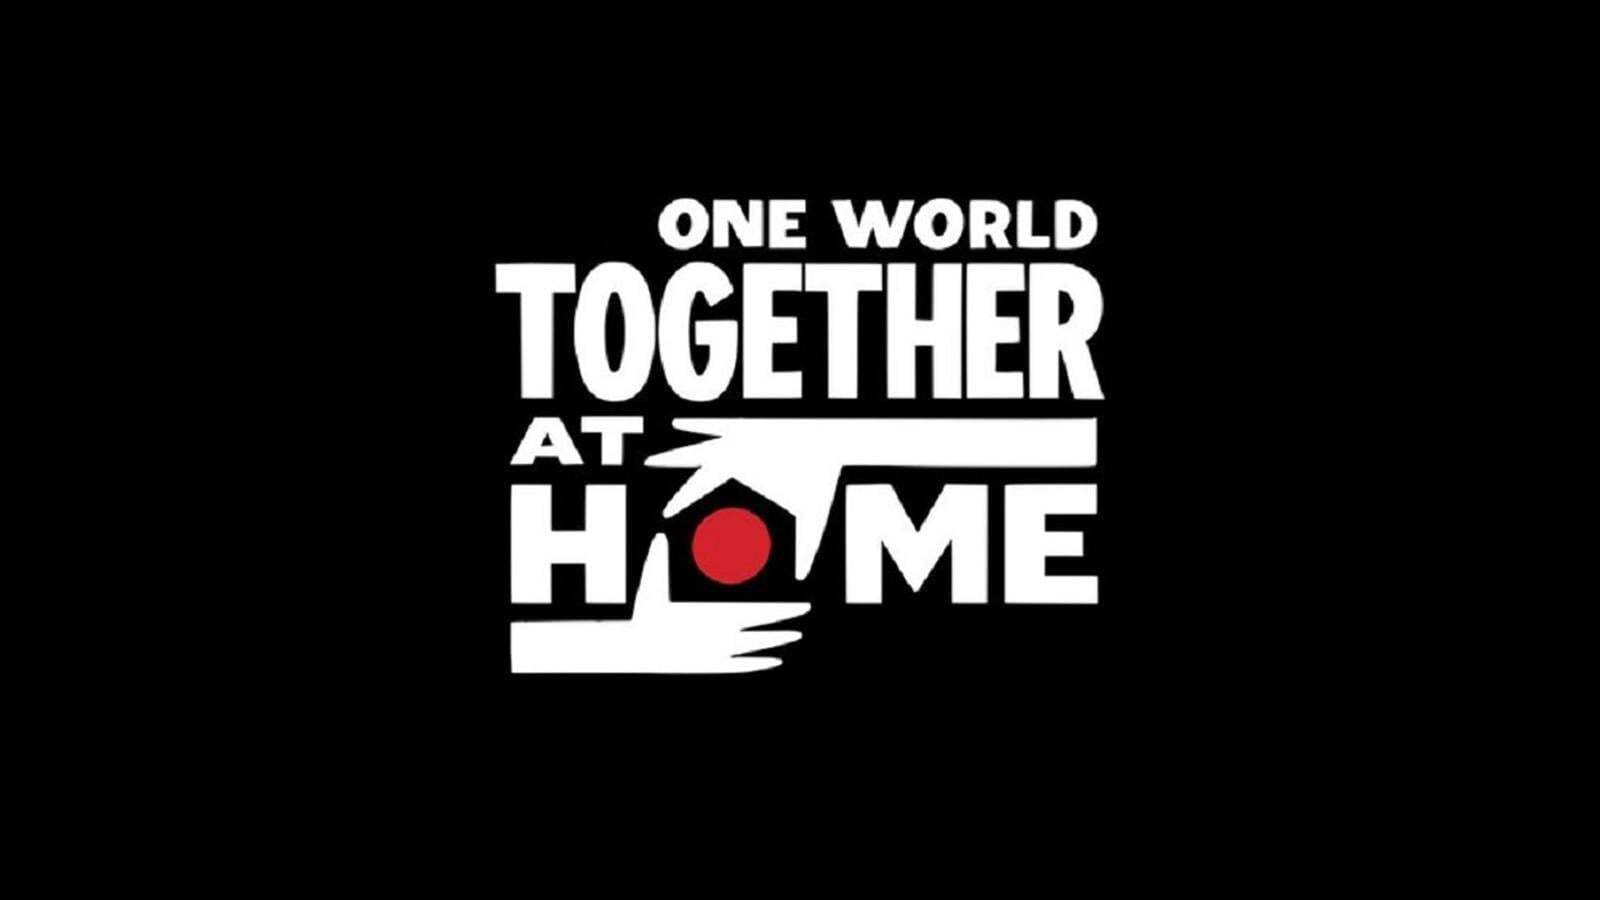 One World Together at Home